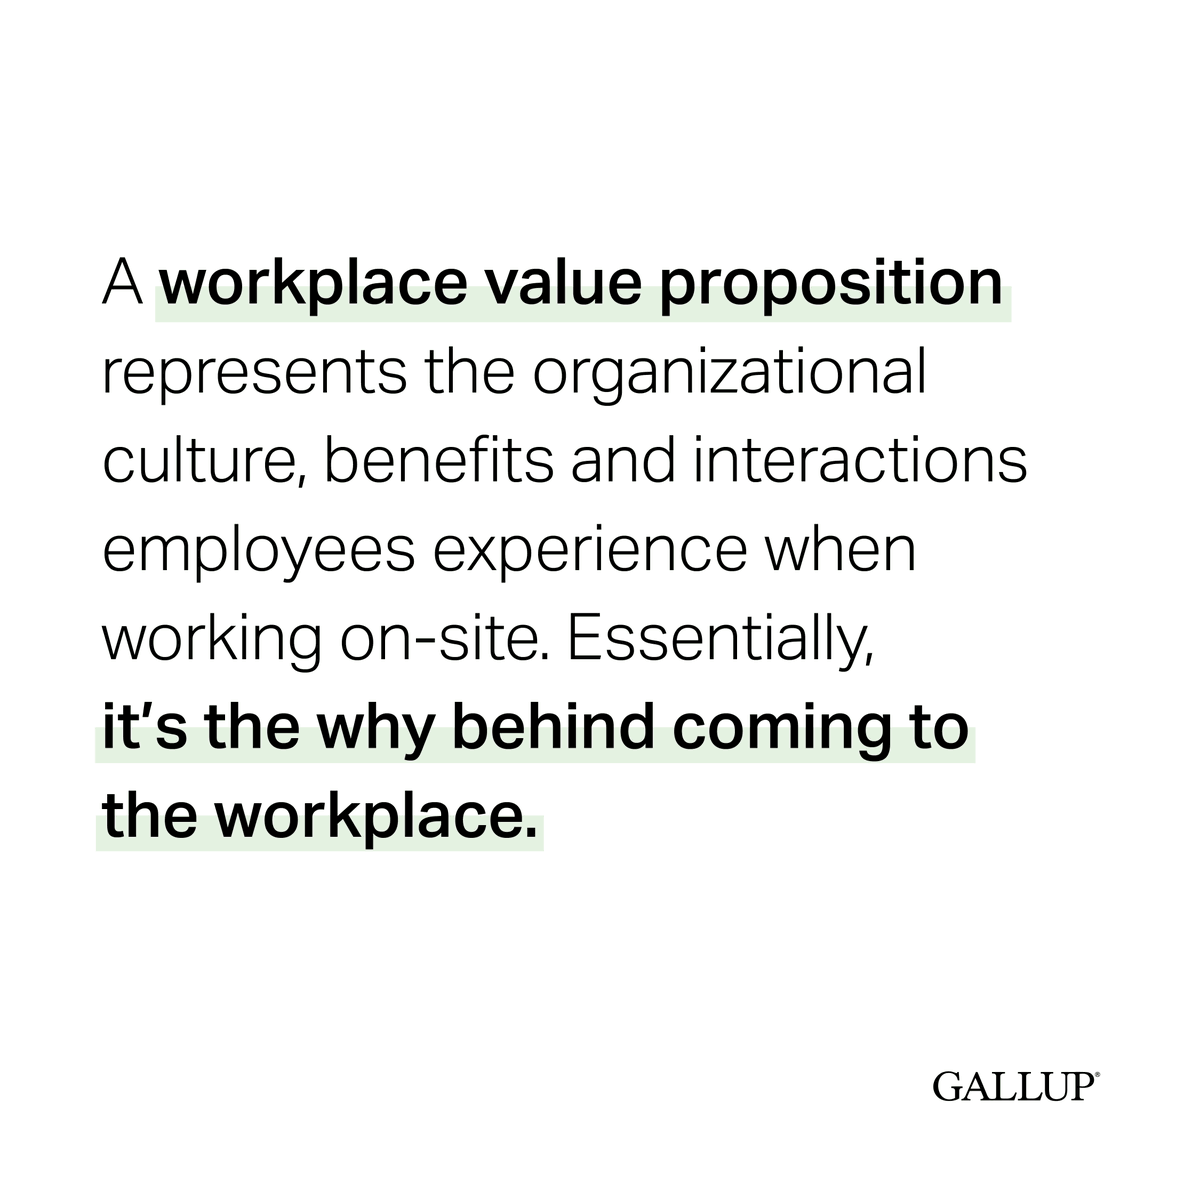 Today, 54% of remote-capable workers are working hybrid and weighing the benefits of the daily commute. If an organization gives employees autonomy over when they come into the office, leaders must offer a compelling reason to invest in the commute. on.gallup.com/3xUTa8E